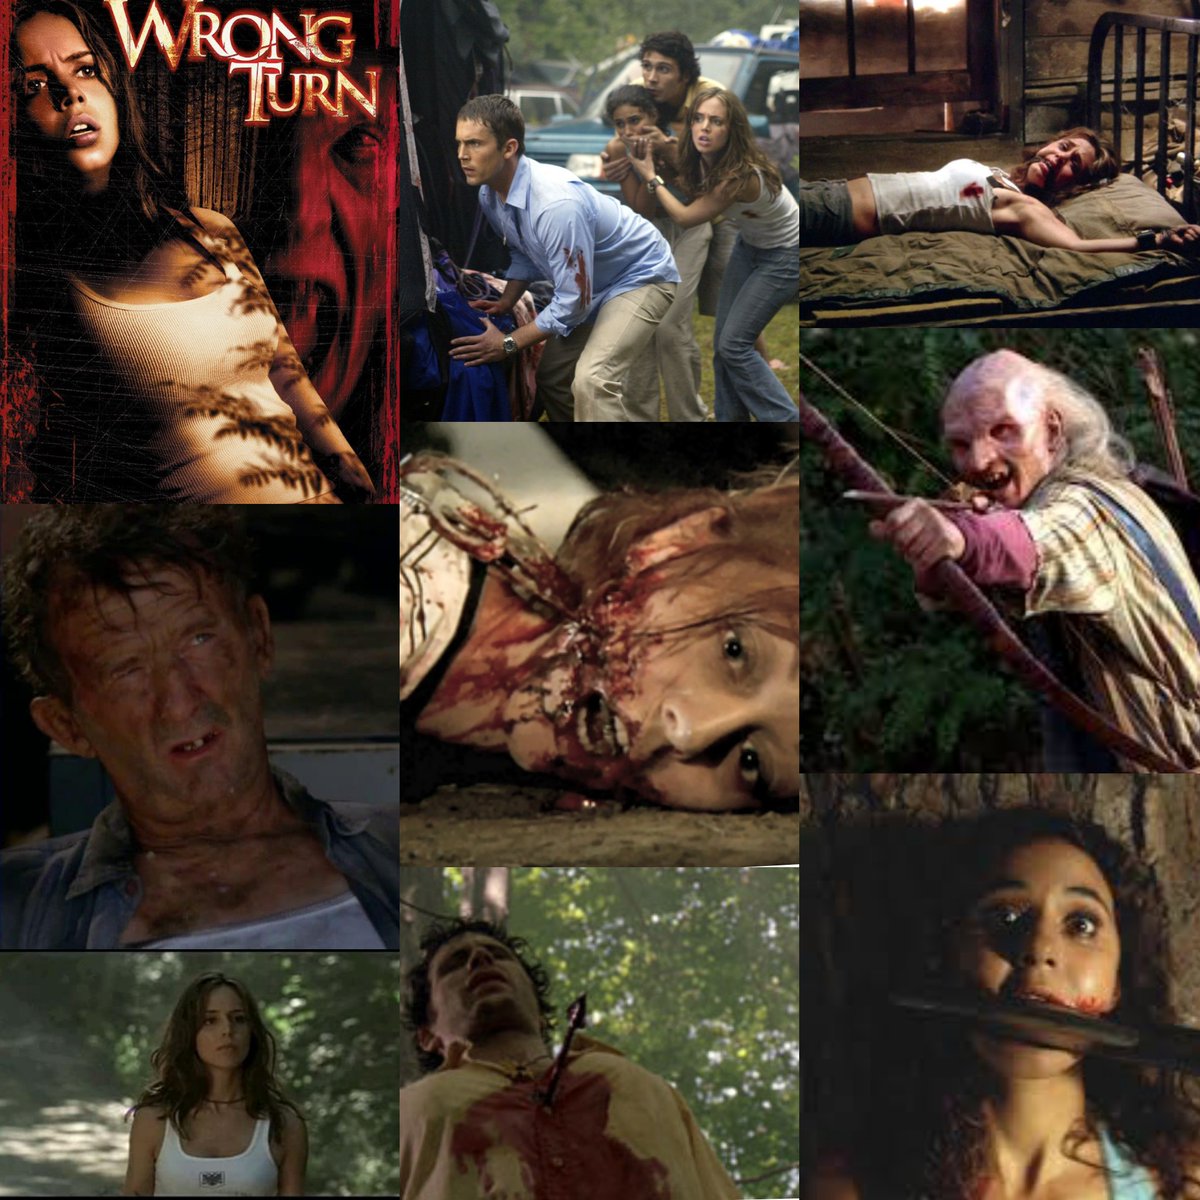 'Wrong Turn' was released on this day in 2003. Happy horror-versary! 🔪💀 #HorrorCommunity #MutantFam